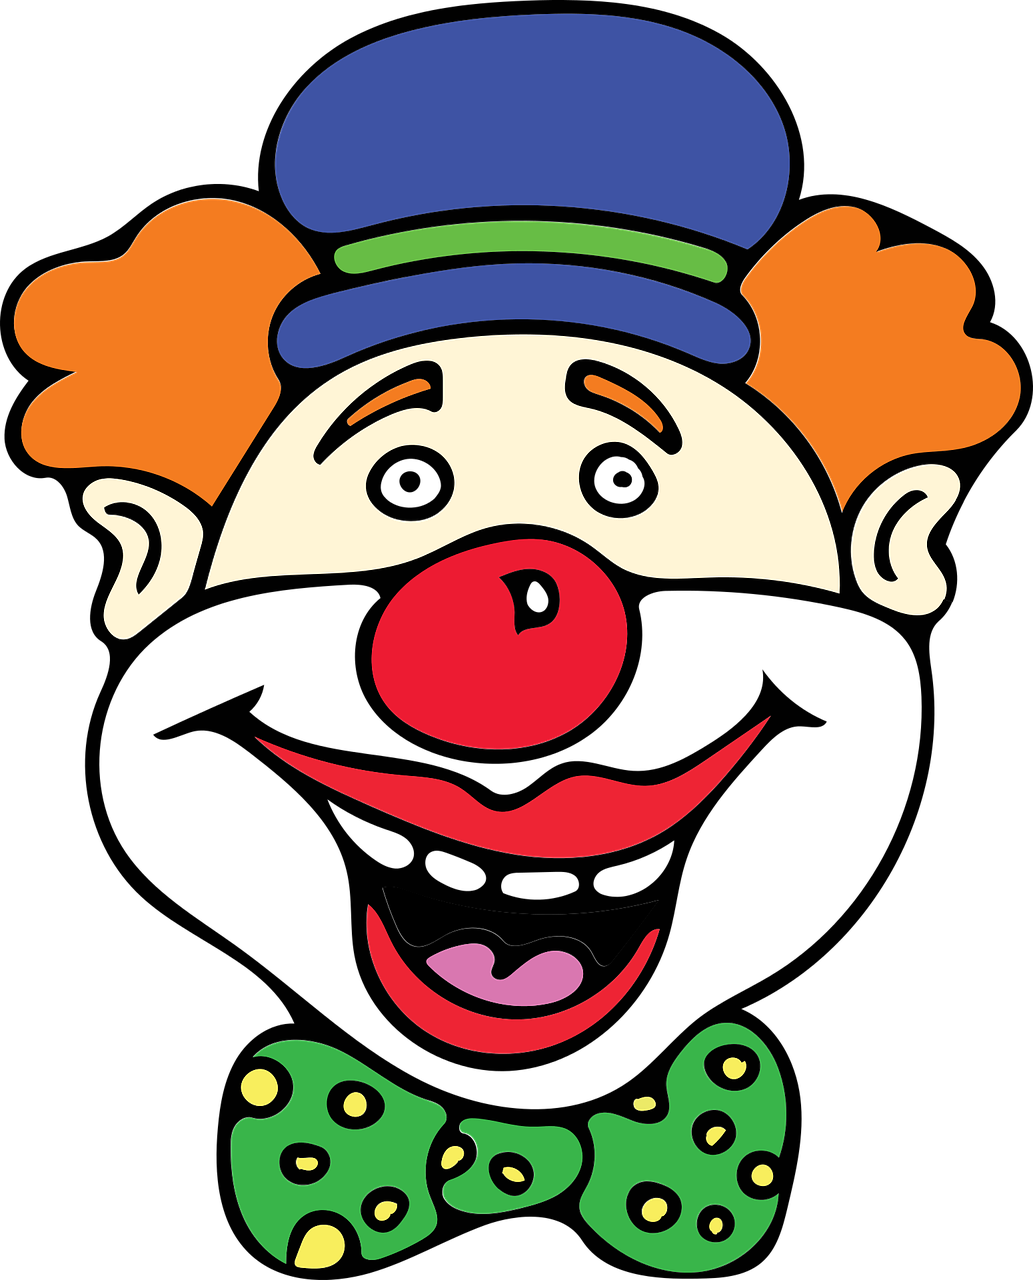 Clown Nose PNG Free Download